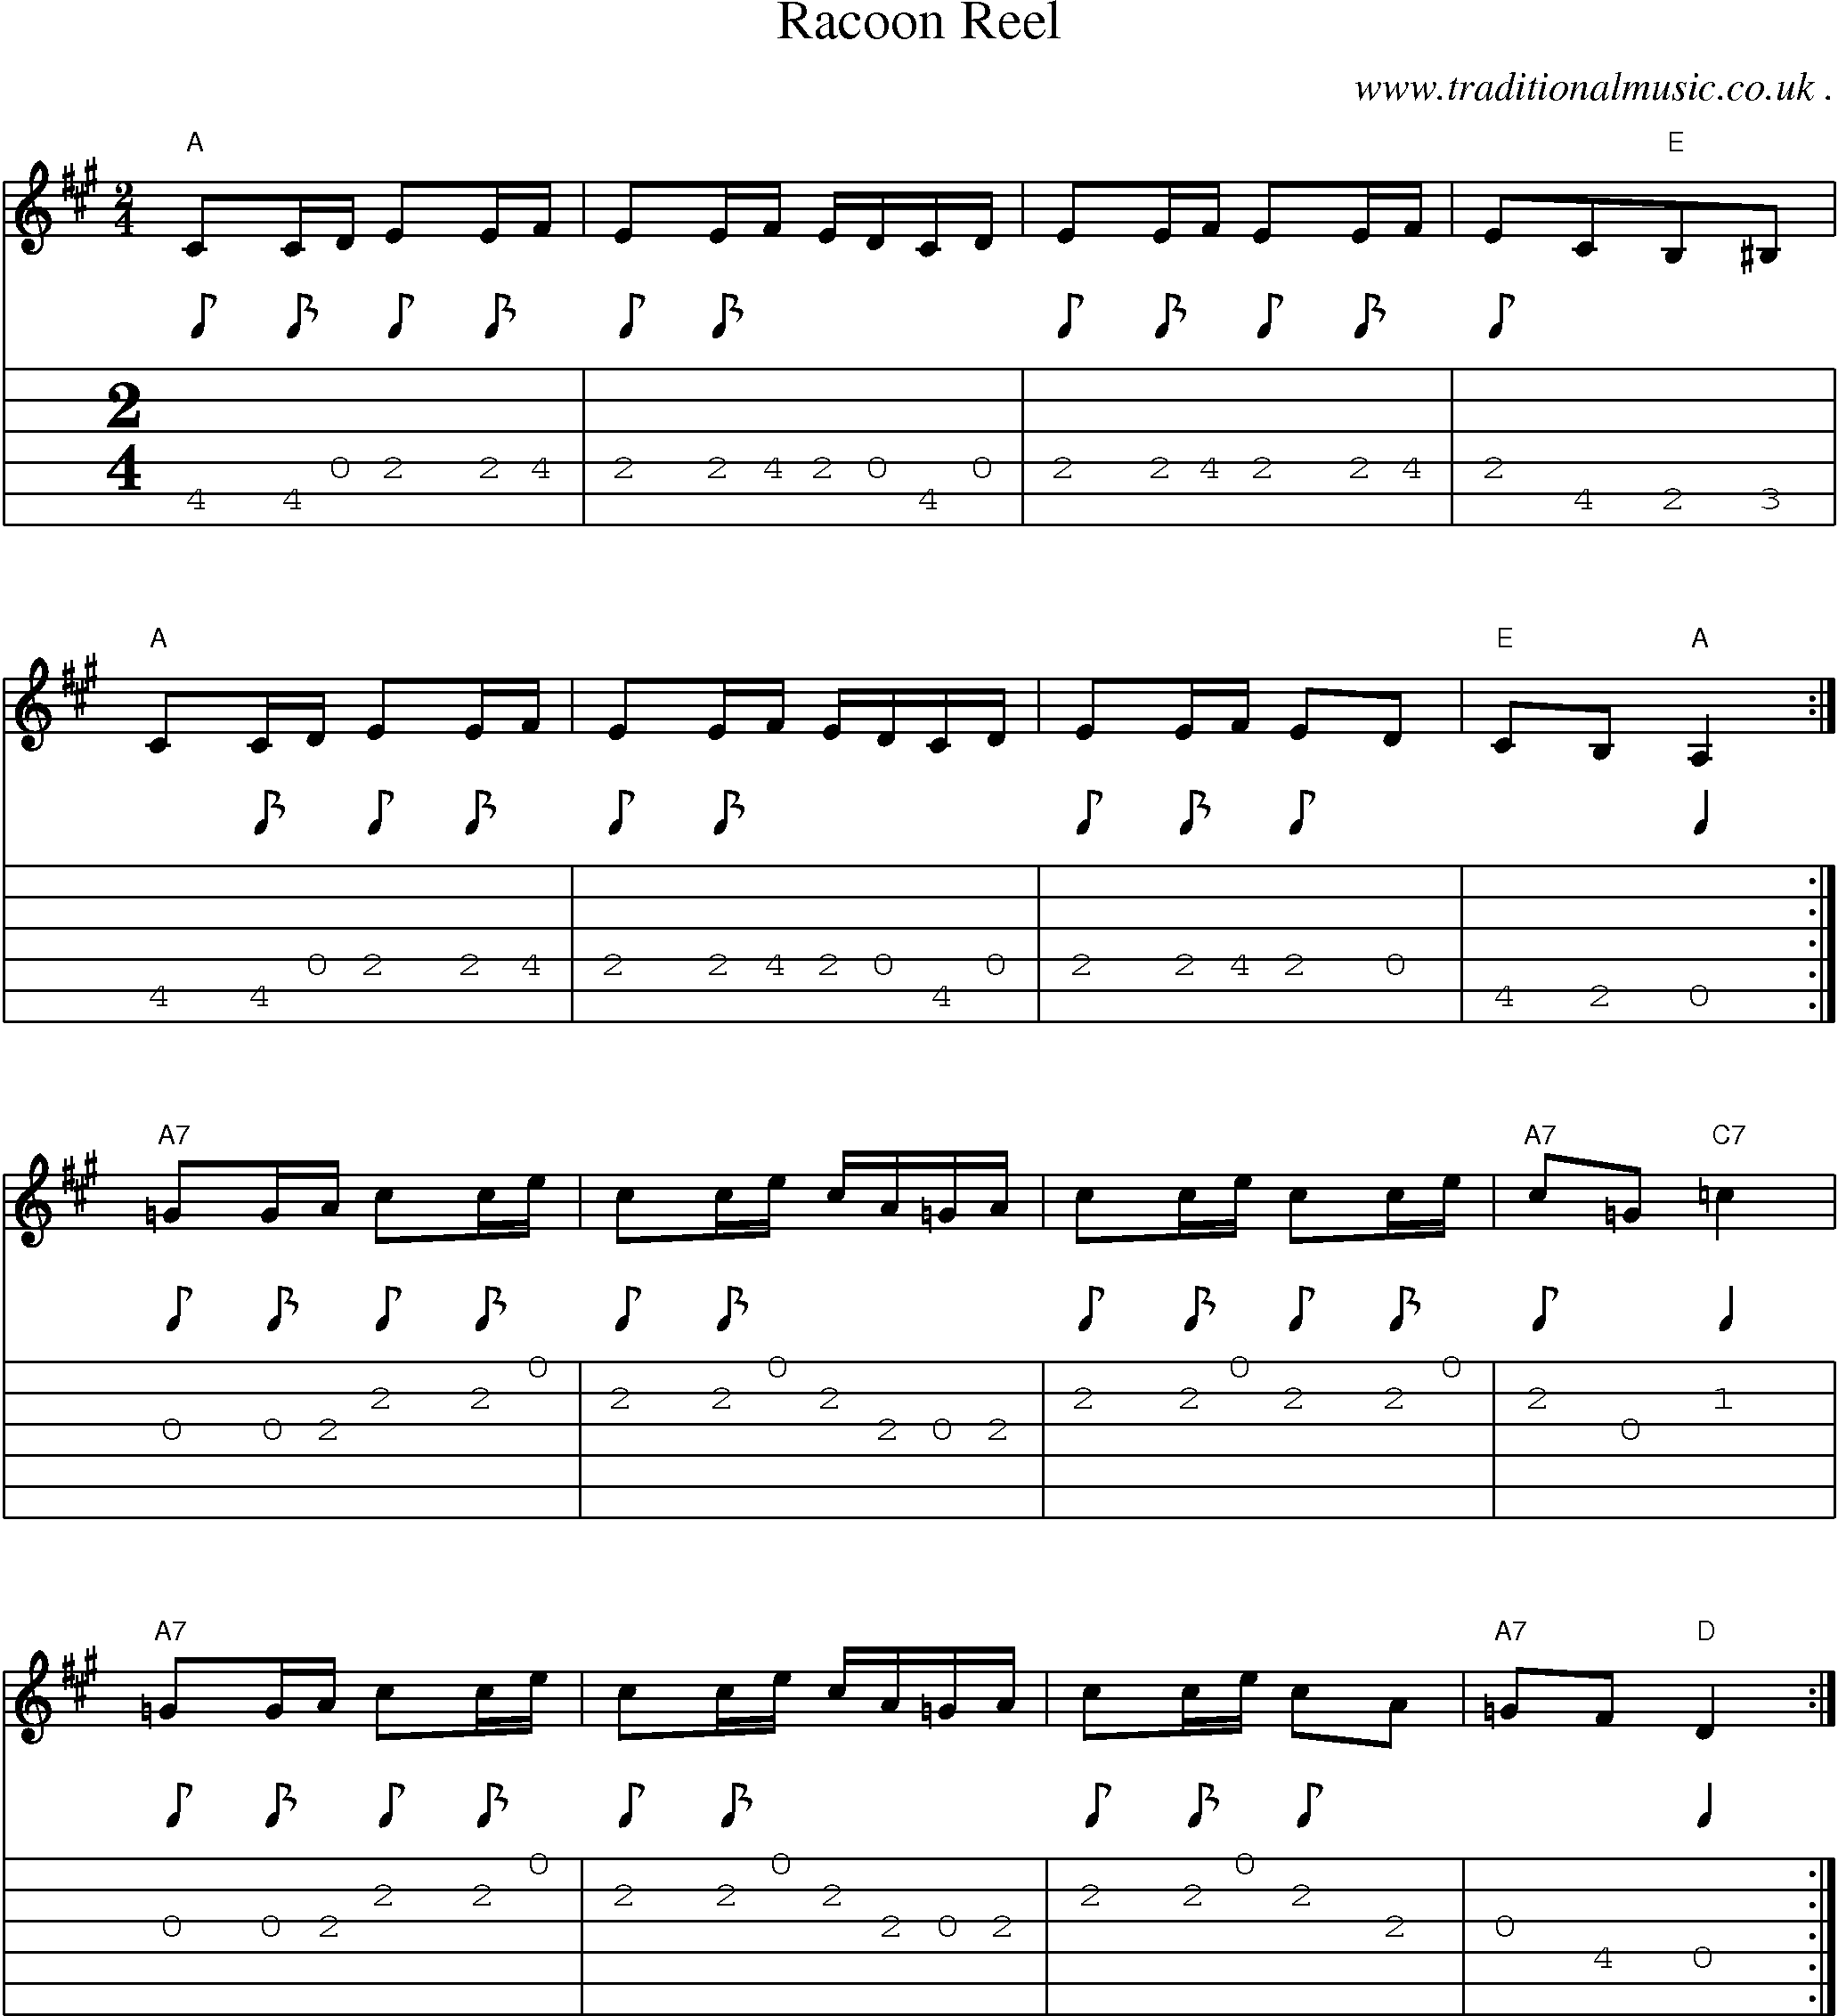 Sheet-Music and Guitar Tabs for Racoon Reel